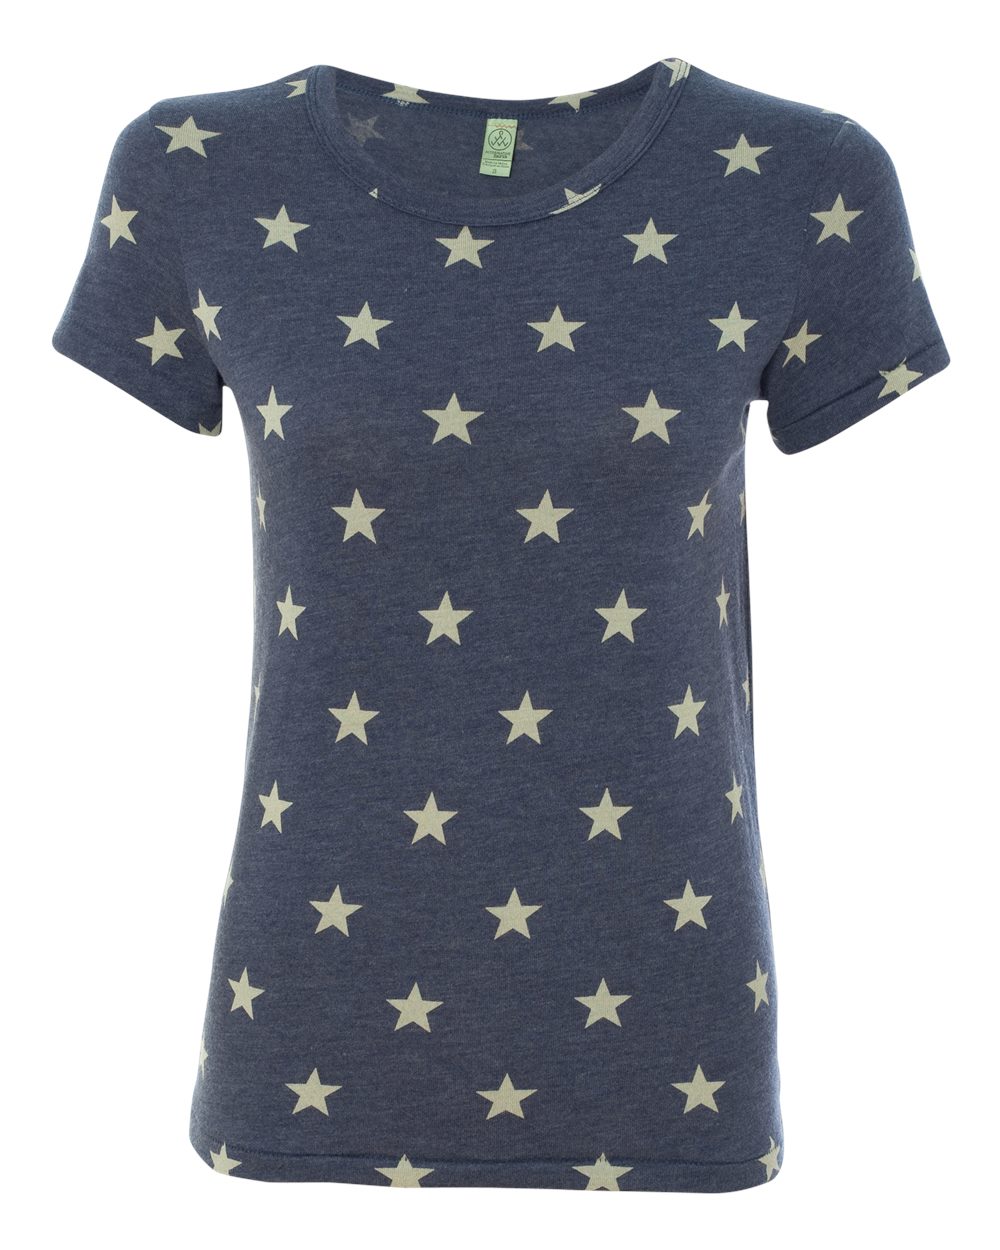 Under the Stars T-shirt - Small